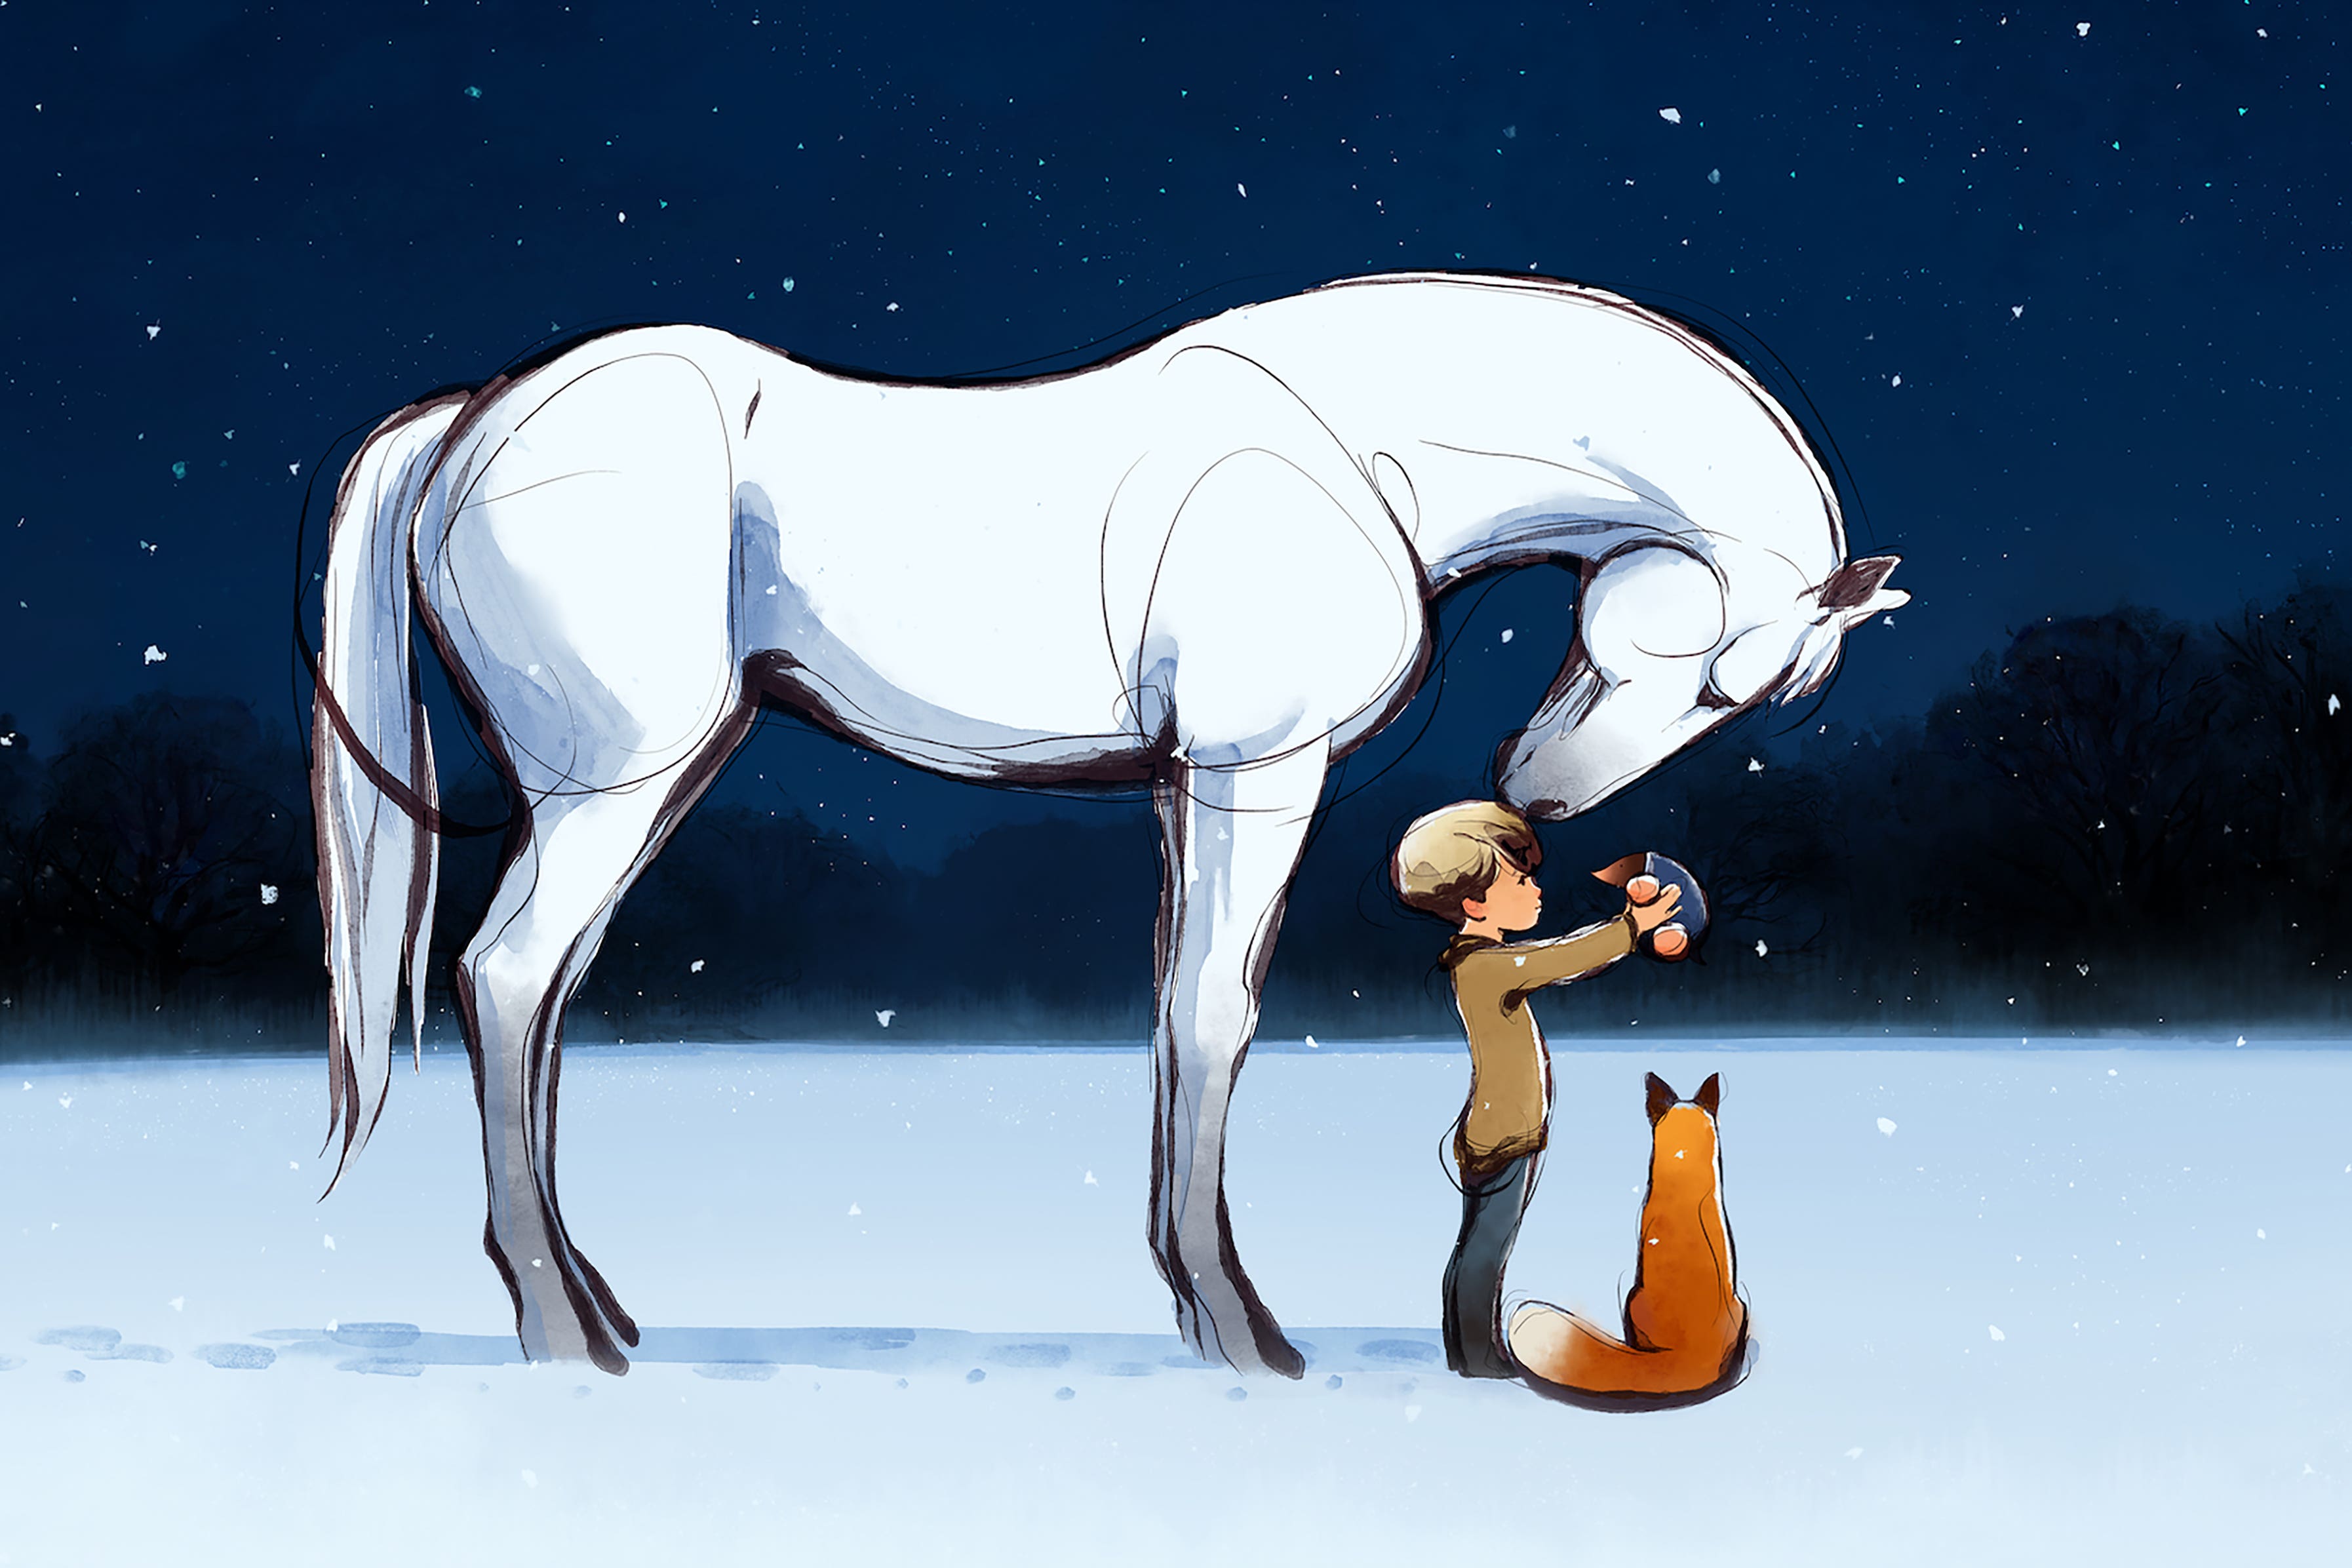 A scene from Charlie Mackesy’s bestselling illustrated book, ‘The Boy, The Mole, The Fox And The Horse’